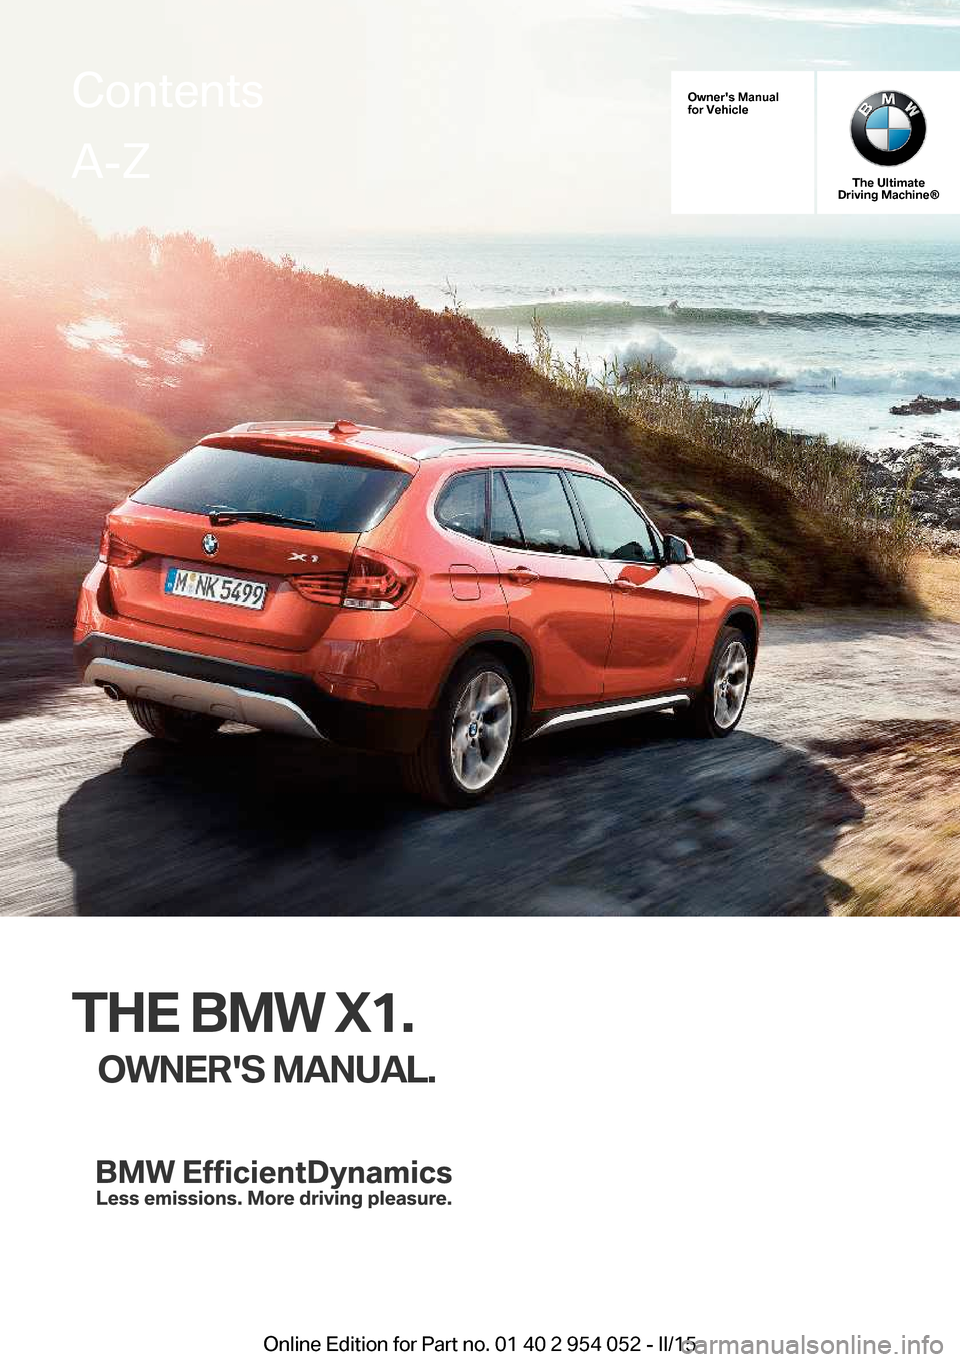 BMW X1 2015 E84 Owners Manual Owners Manual
for Vehicle
The Ultimate
Driving Machine®
THE BMW X1.
OWNERS MANUAL.
ContentsA-Z
Online Edition for Part no. 01 40 2 954 052 - II/15   